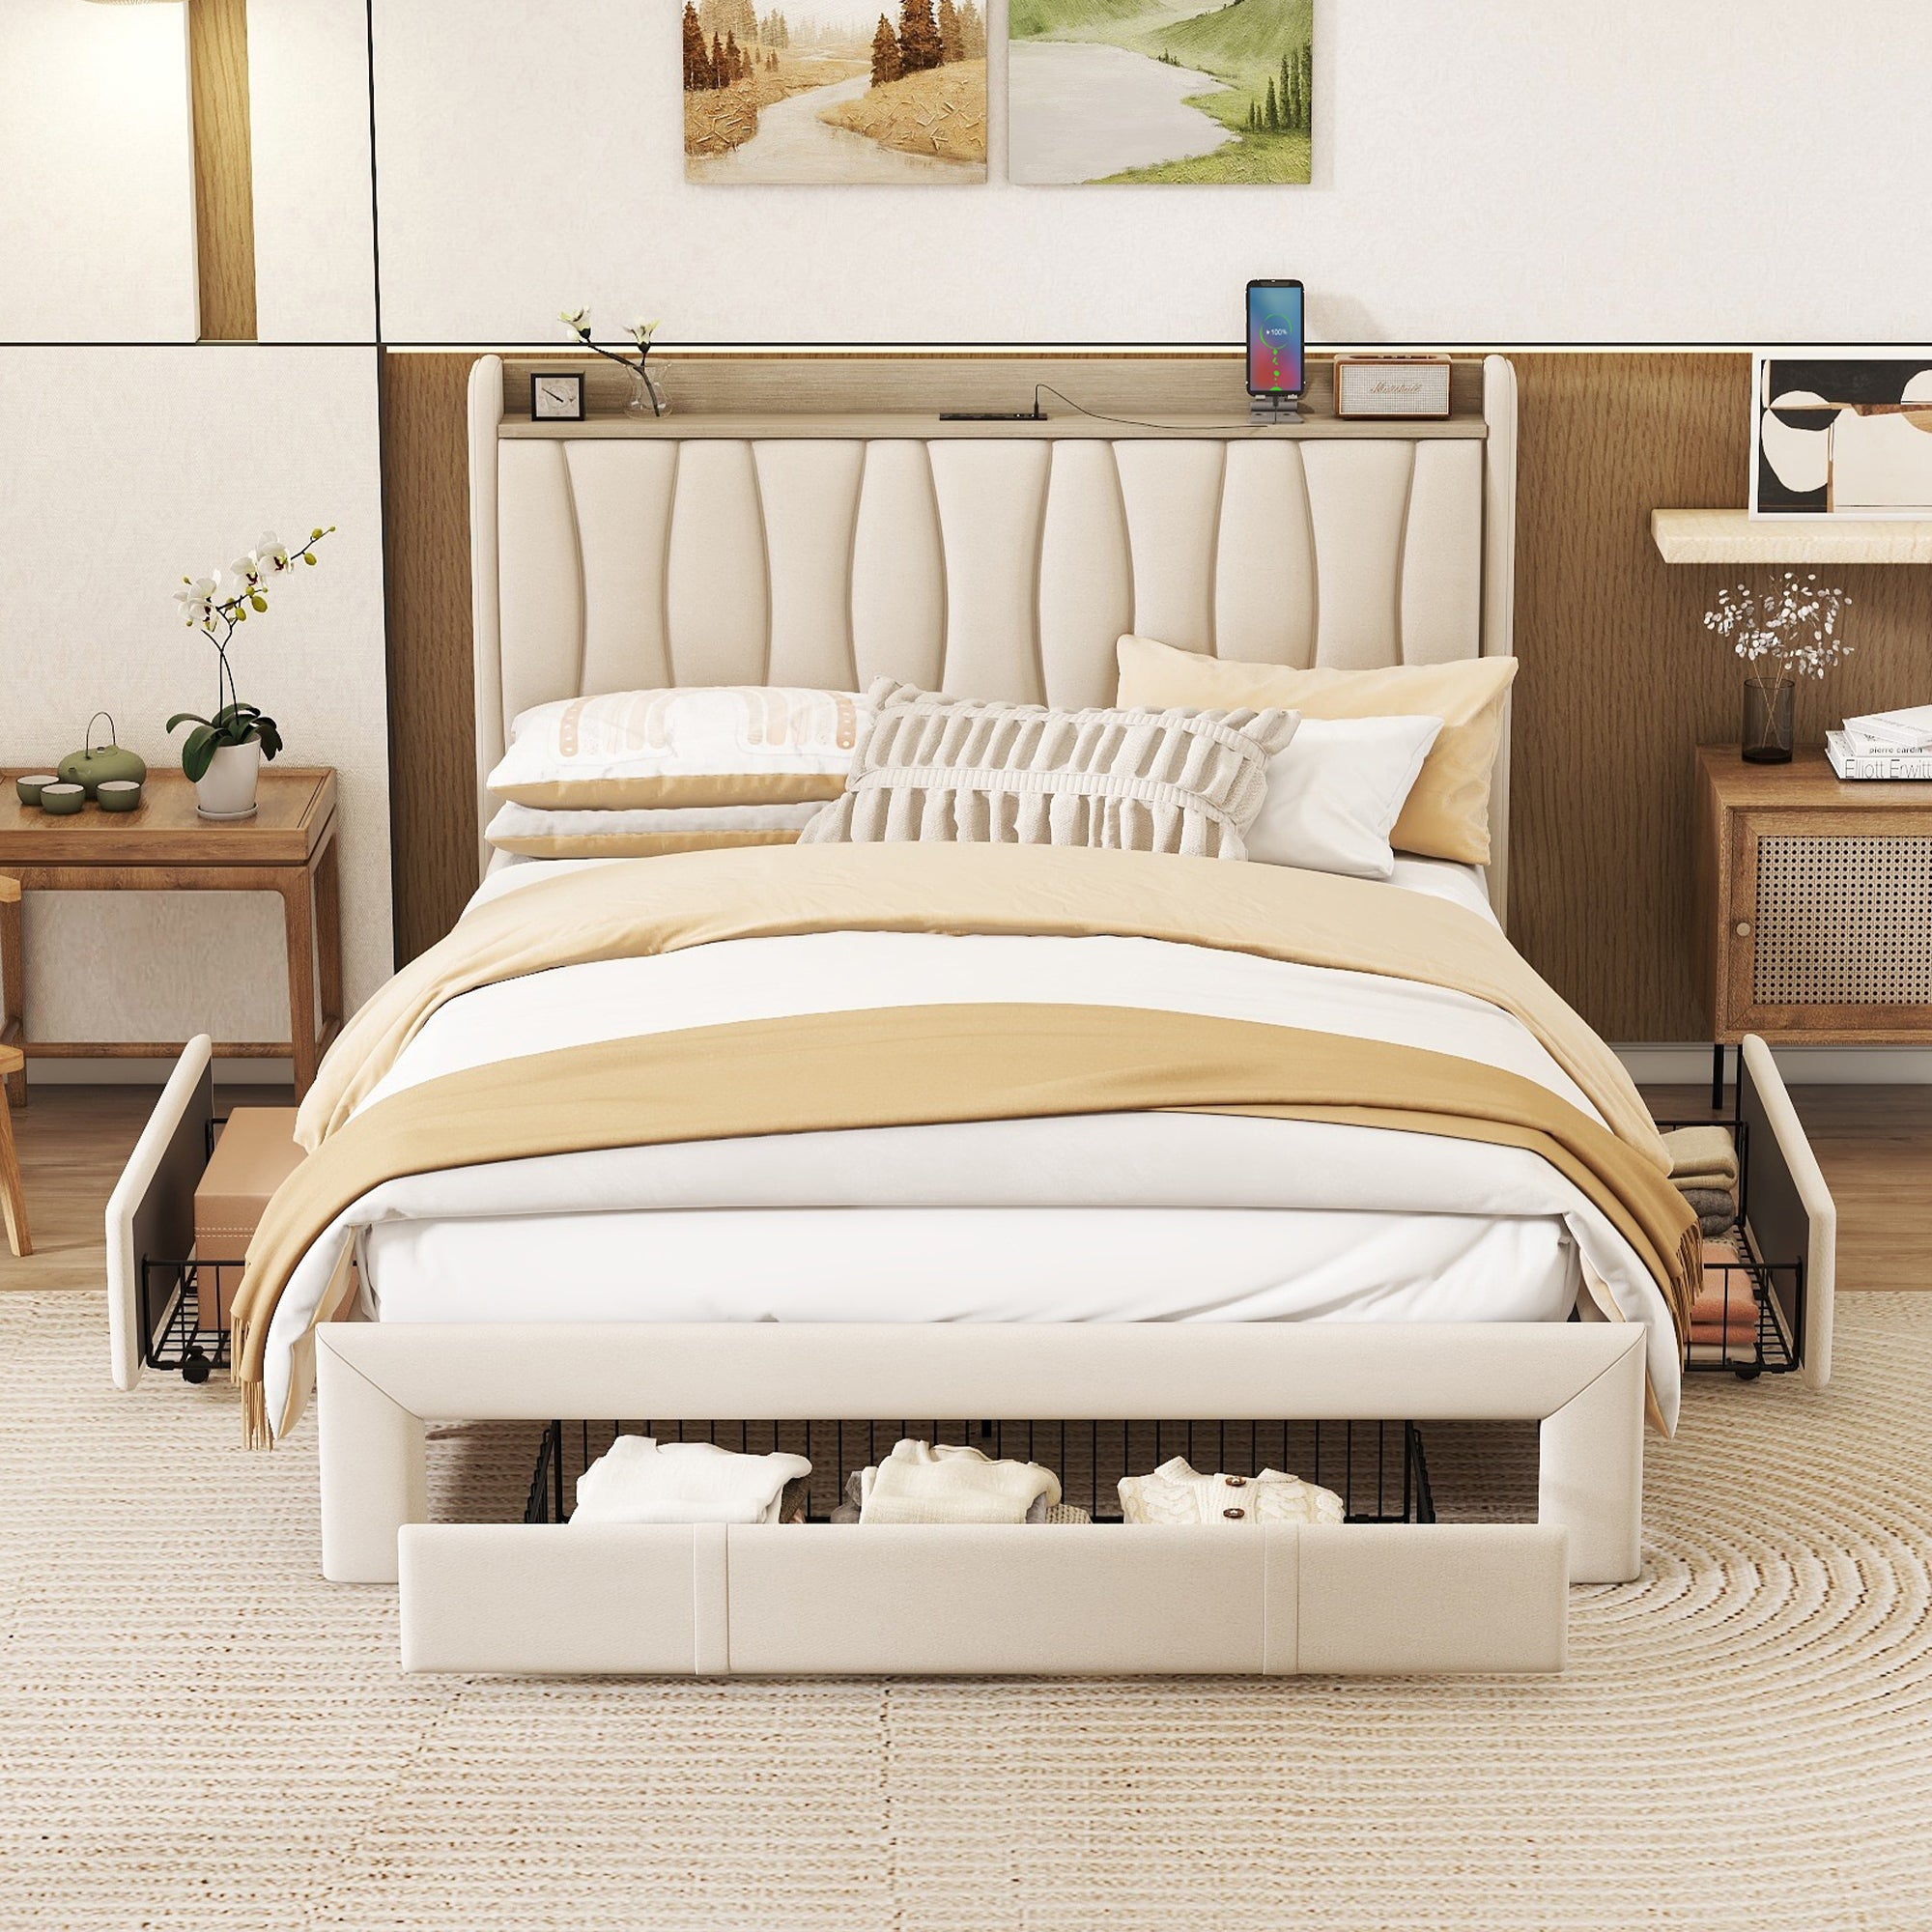 Bellemave Queen Size Upholstered Platform Bed with 3 Drawers,Storage Headboard and Charging Station